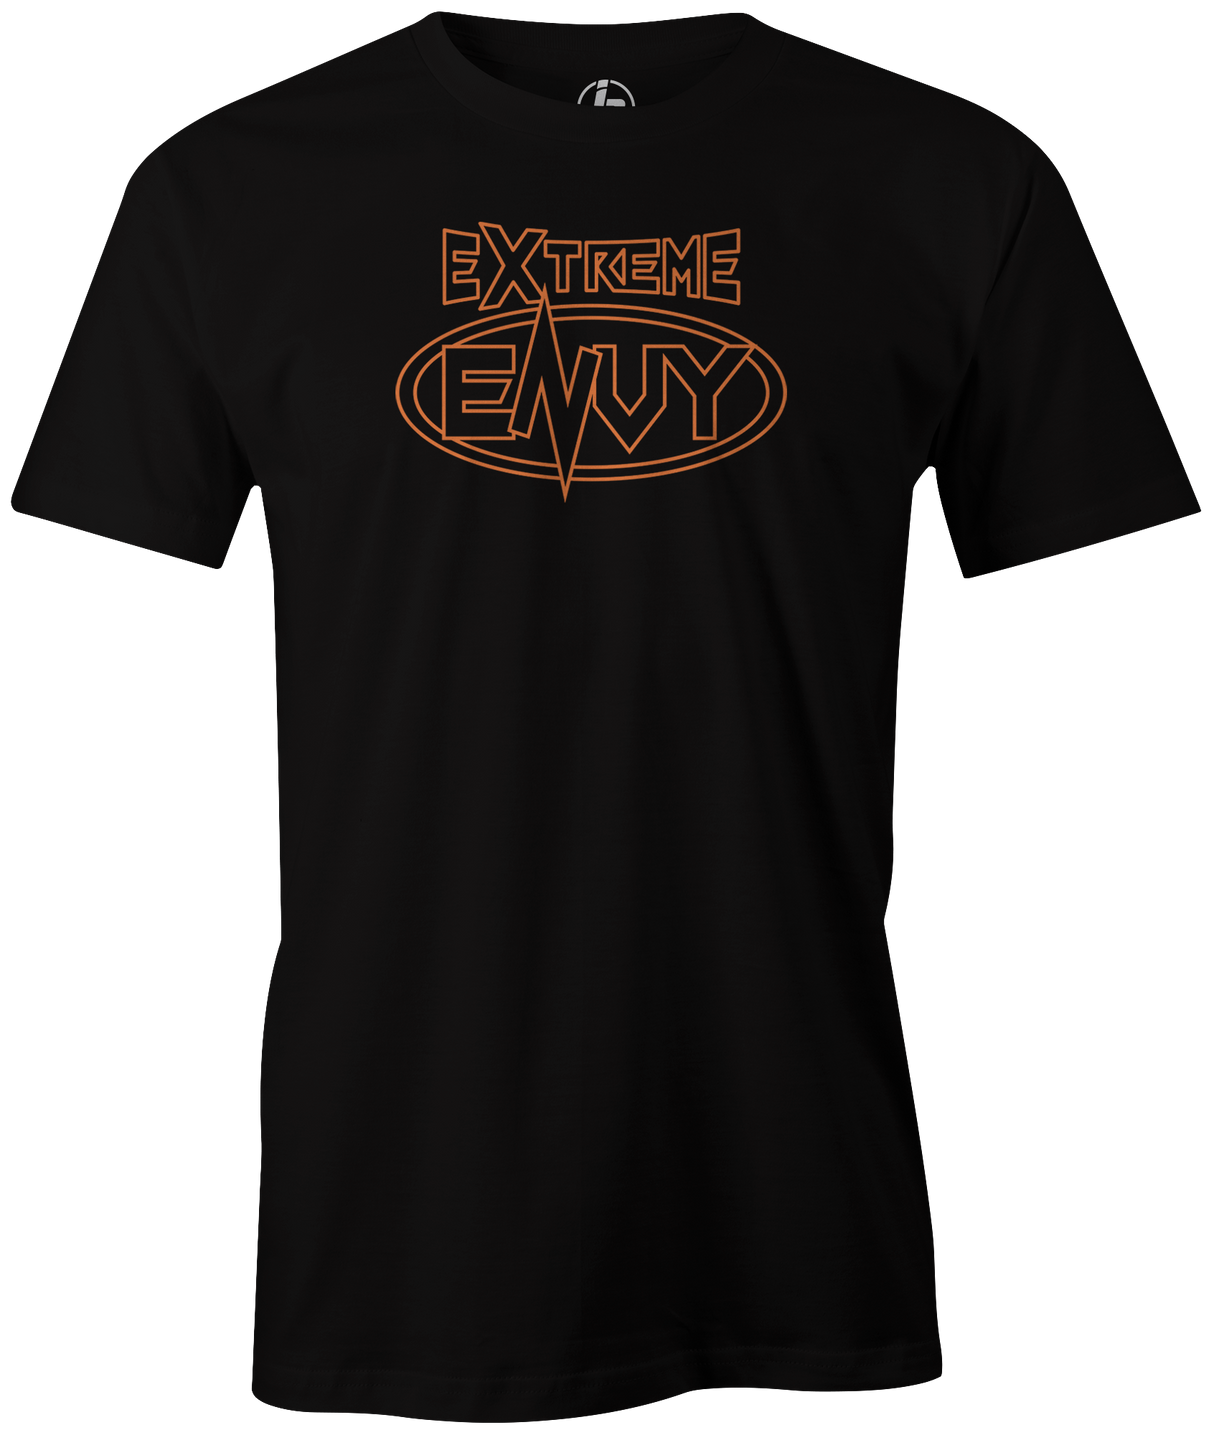 The new Hammer Extreme Envy. Your competitors will definitely Envy you in this new tee! Hit the lanes with this cool t-shirt to show everyone how big of a bowling fan you are! Tshirt, tee, tee-shirt, tee shirt, teeshirt, shirt. League bowling team shirt. Bill O'neill